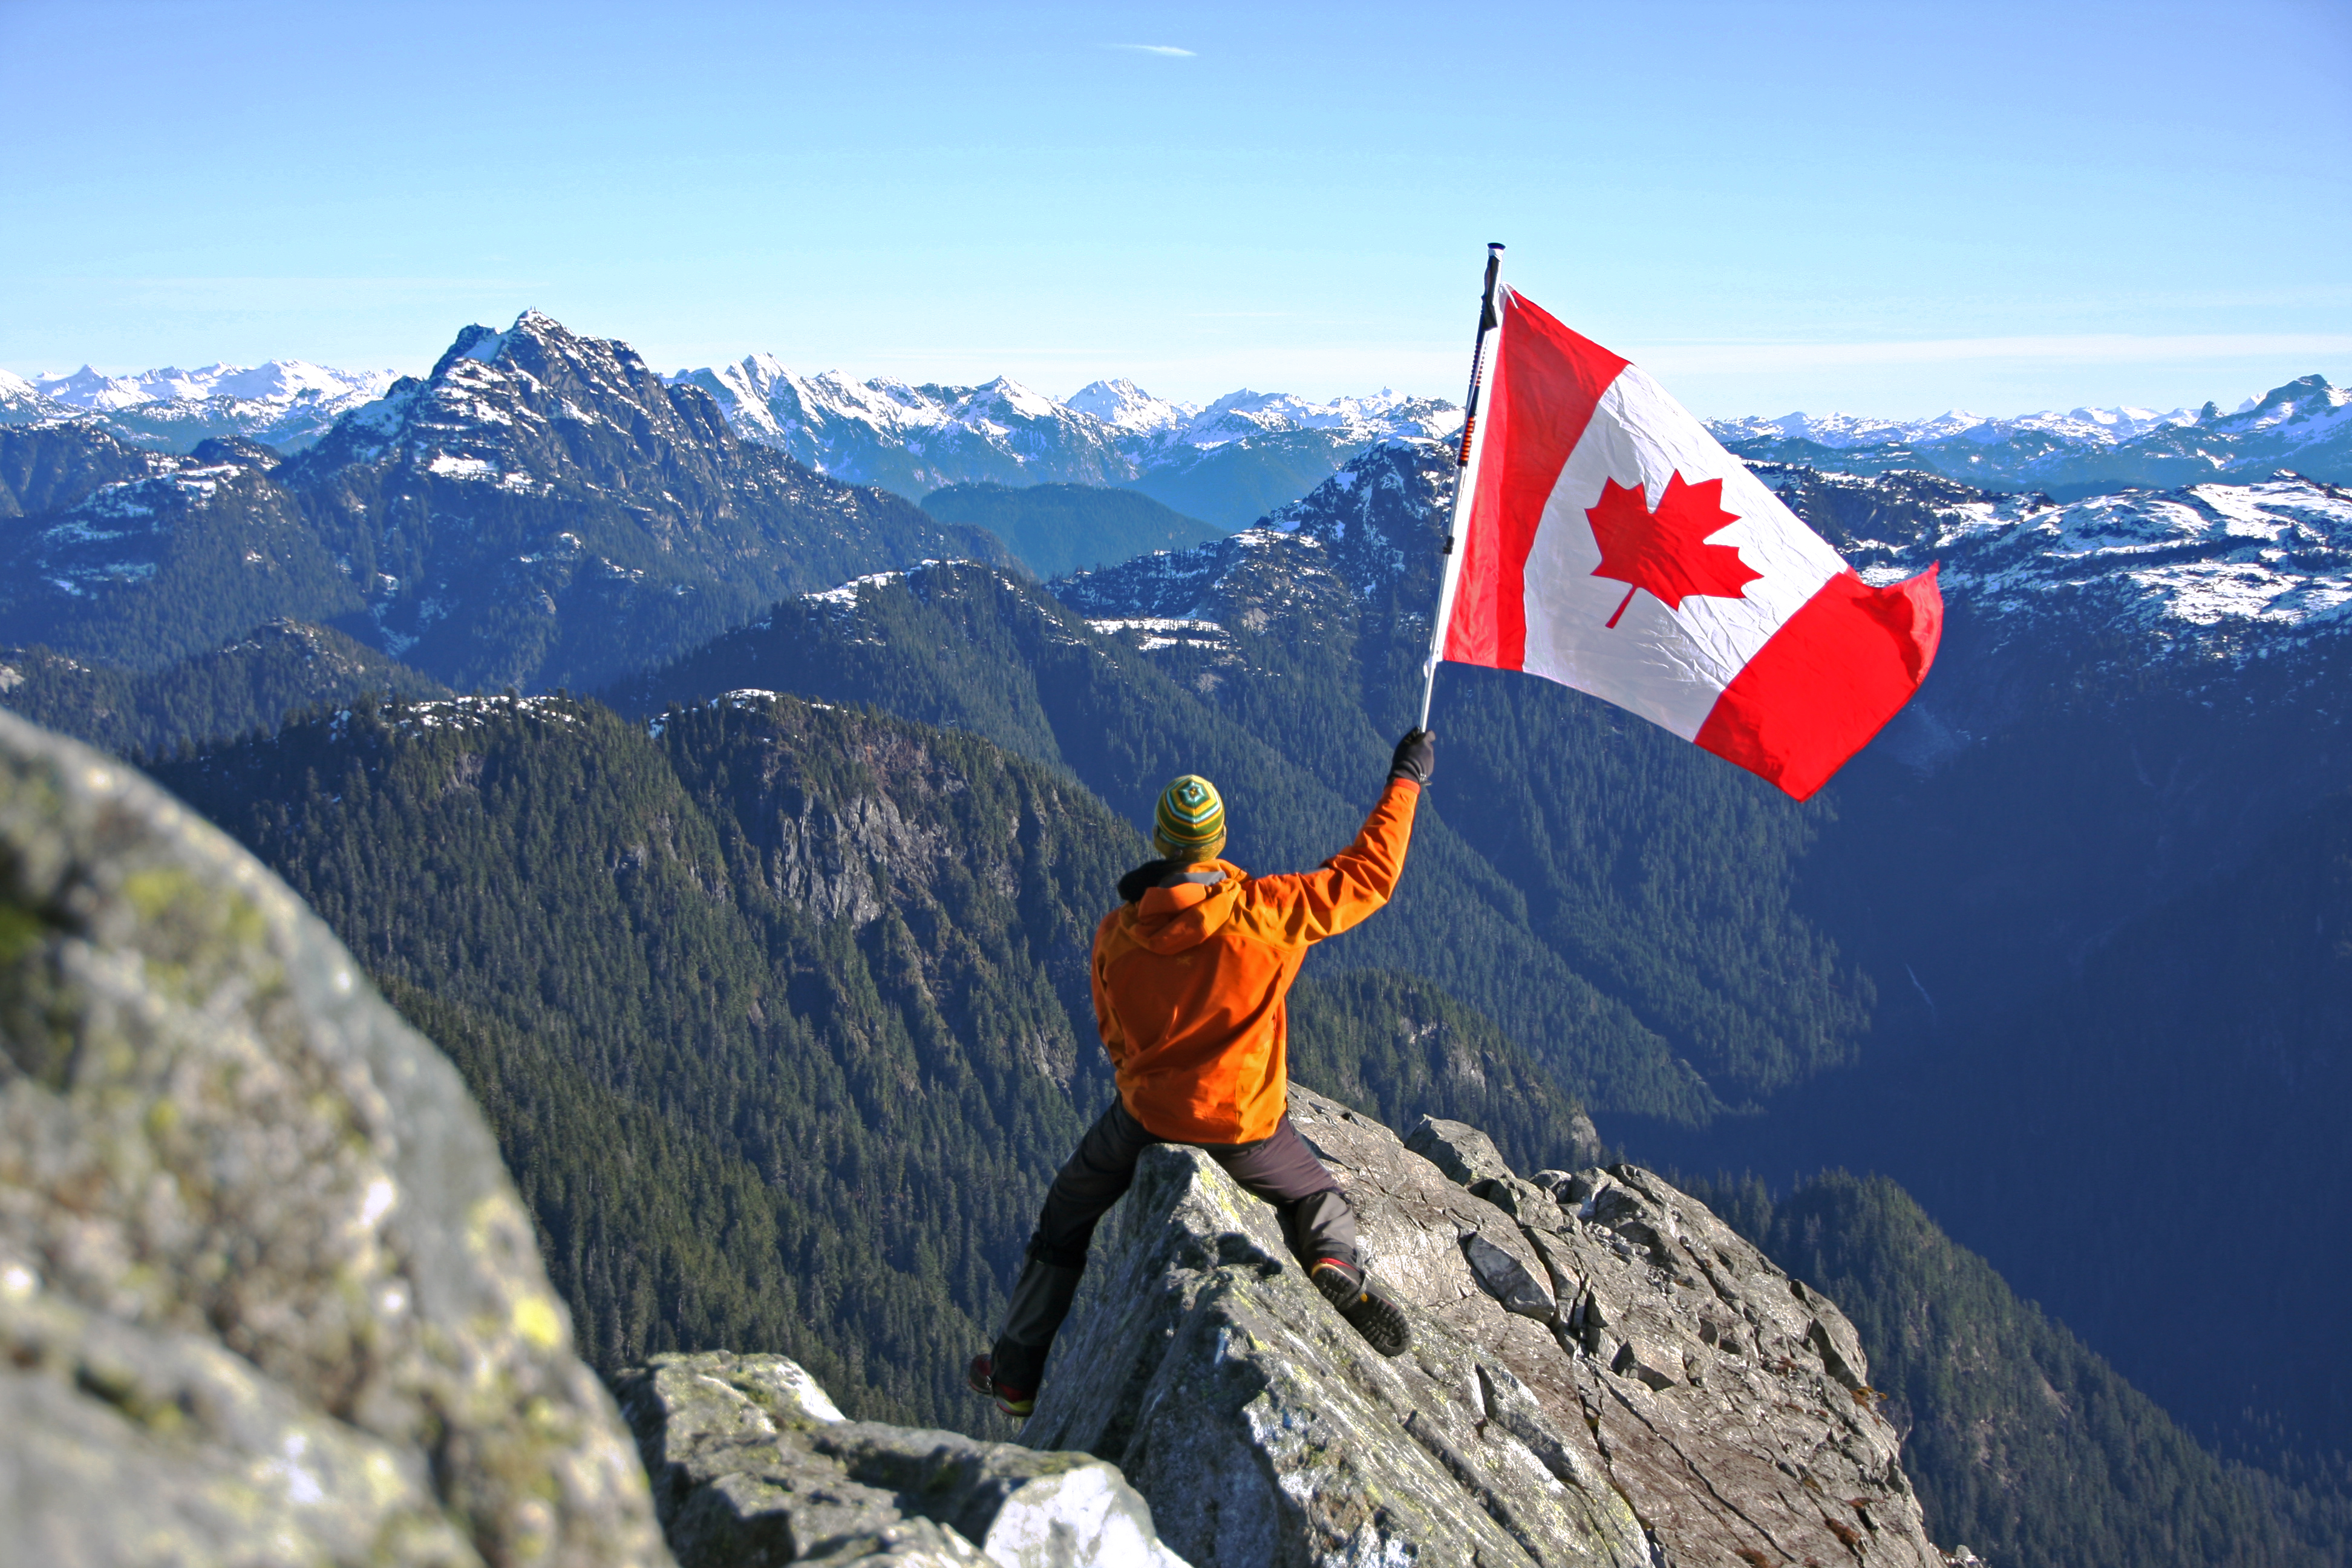 Crown Mountain Hike - North Vancouver - Canada